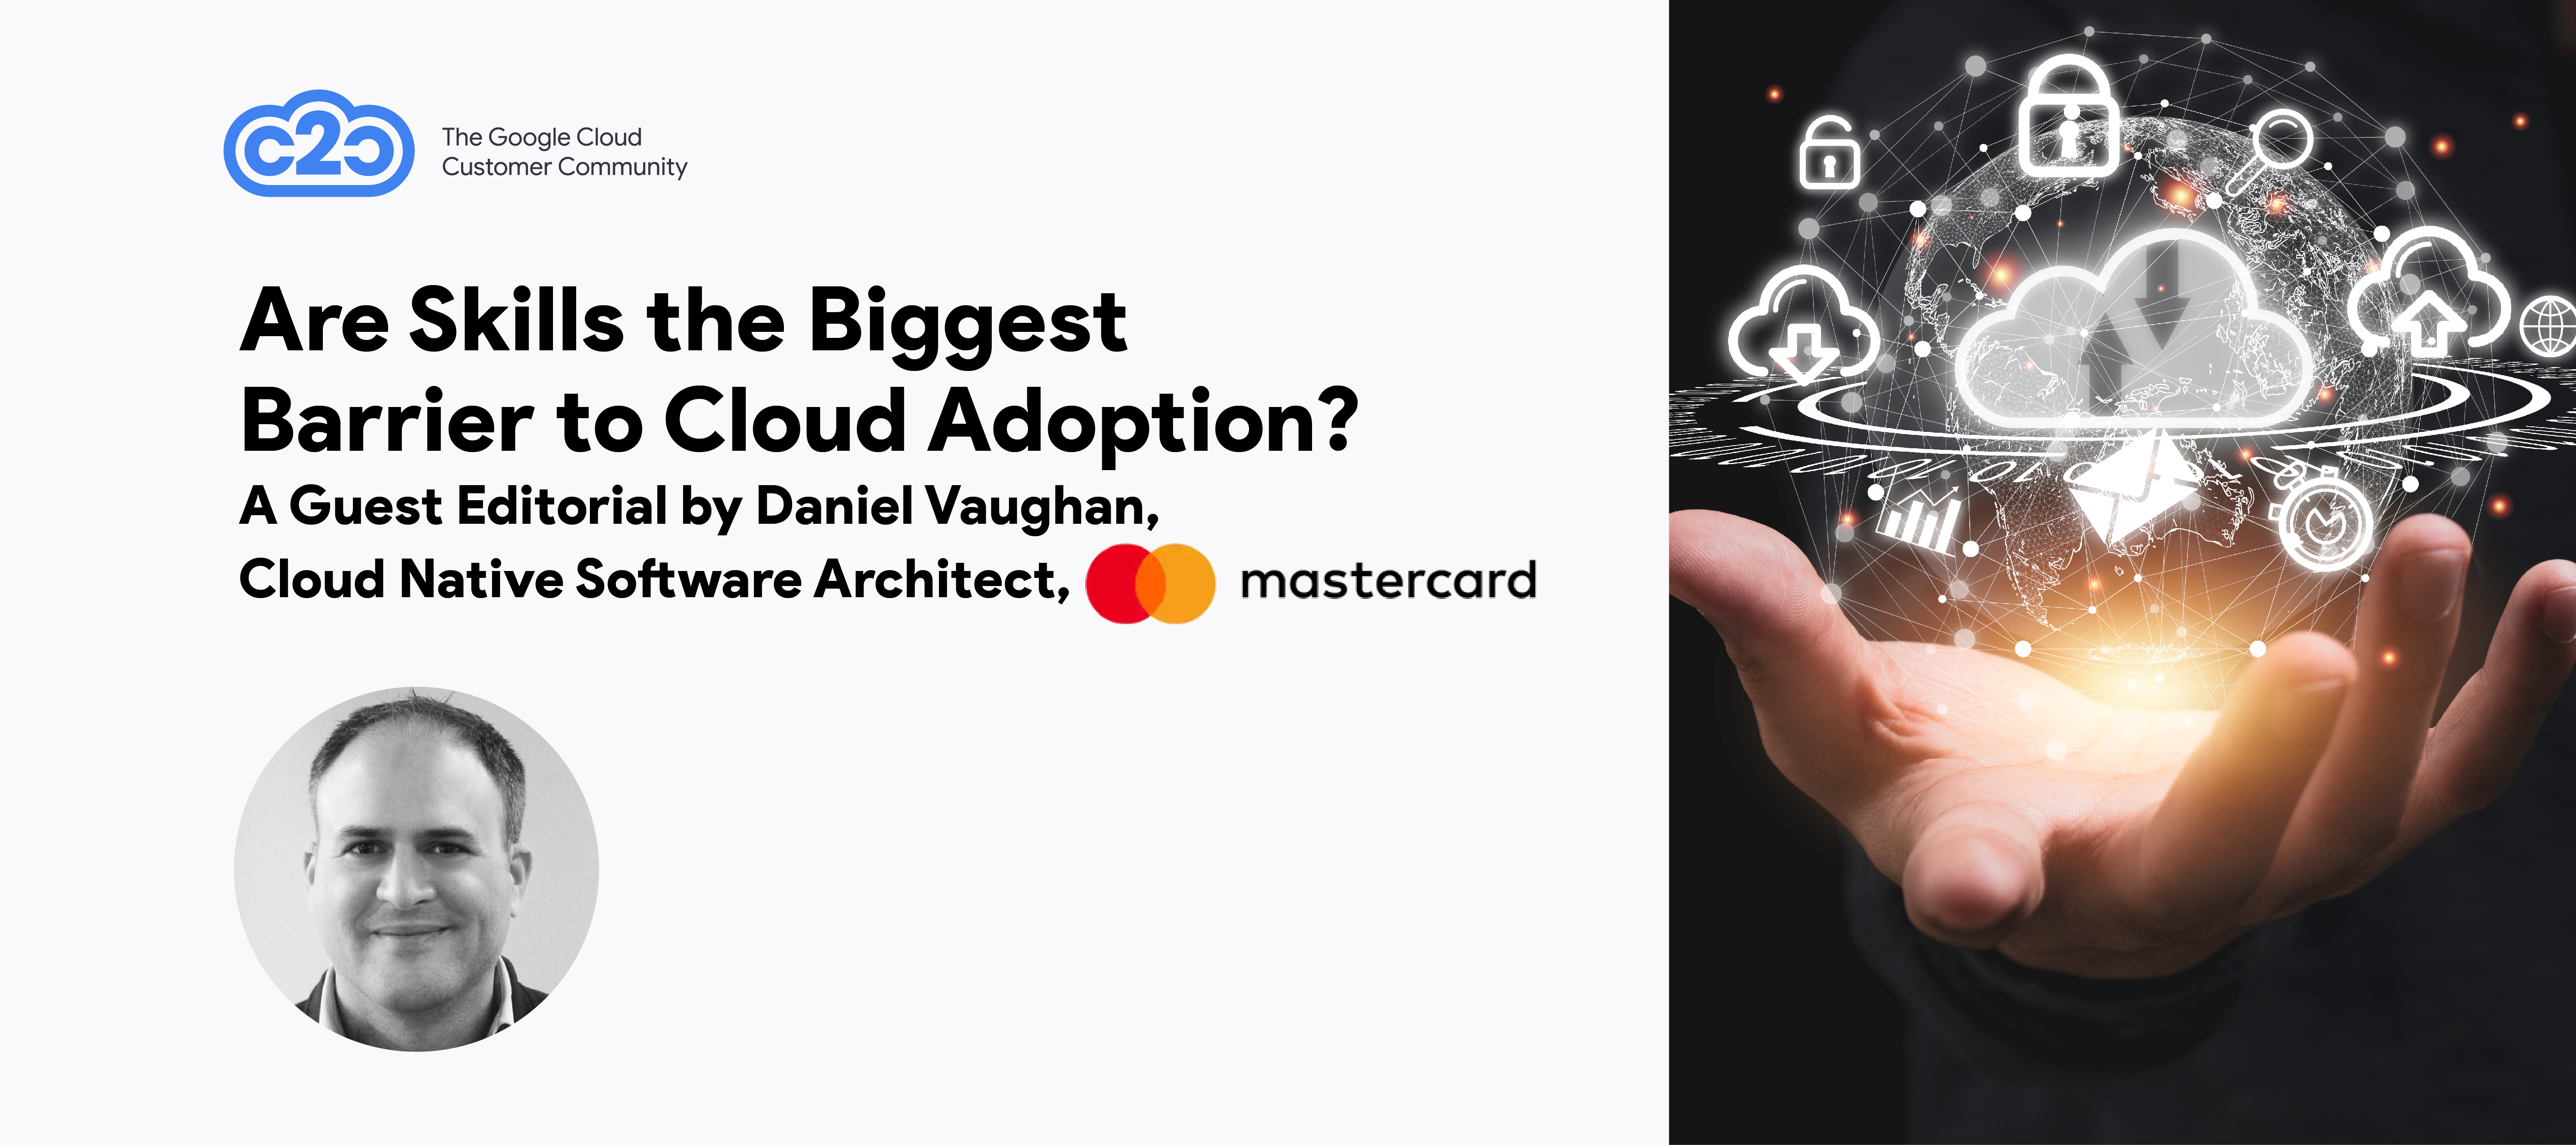 Are Skills the Biggest Barrier to Cloud Adoption? A Guest Editorial by Daniel Vaughan, Cloud Native Software Architect, Mastercard